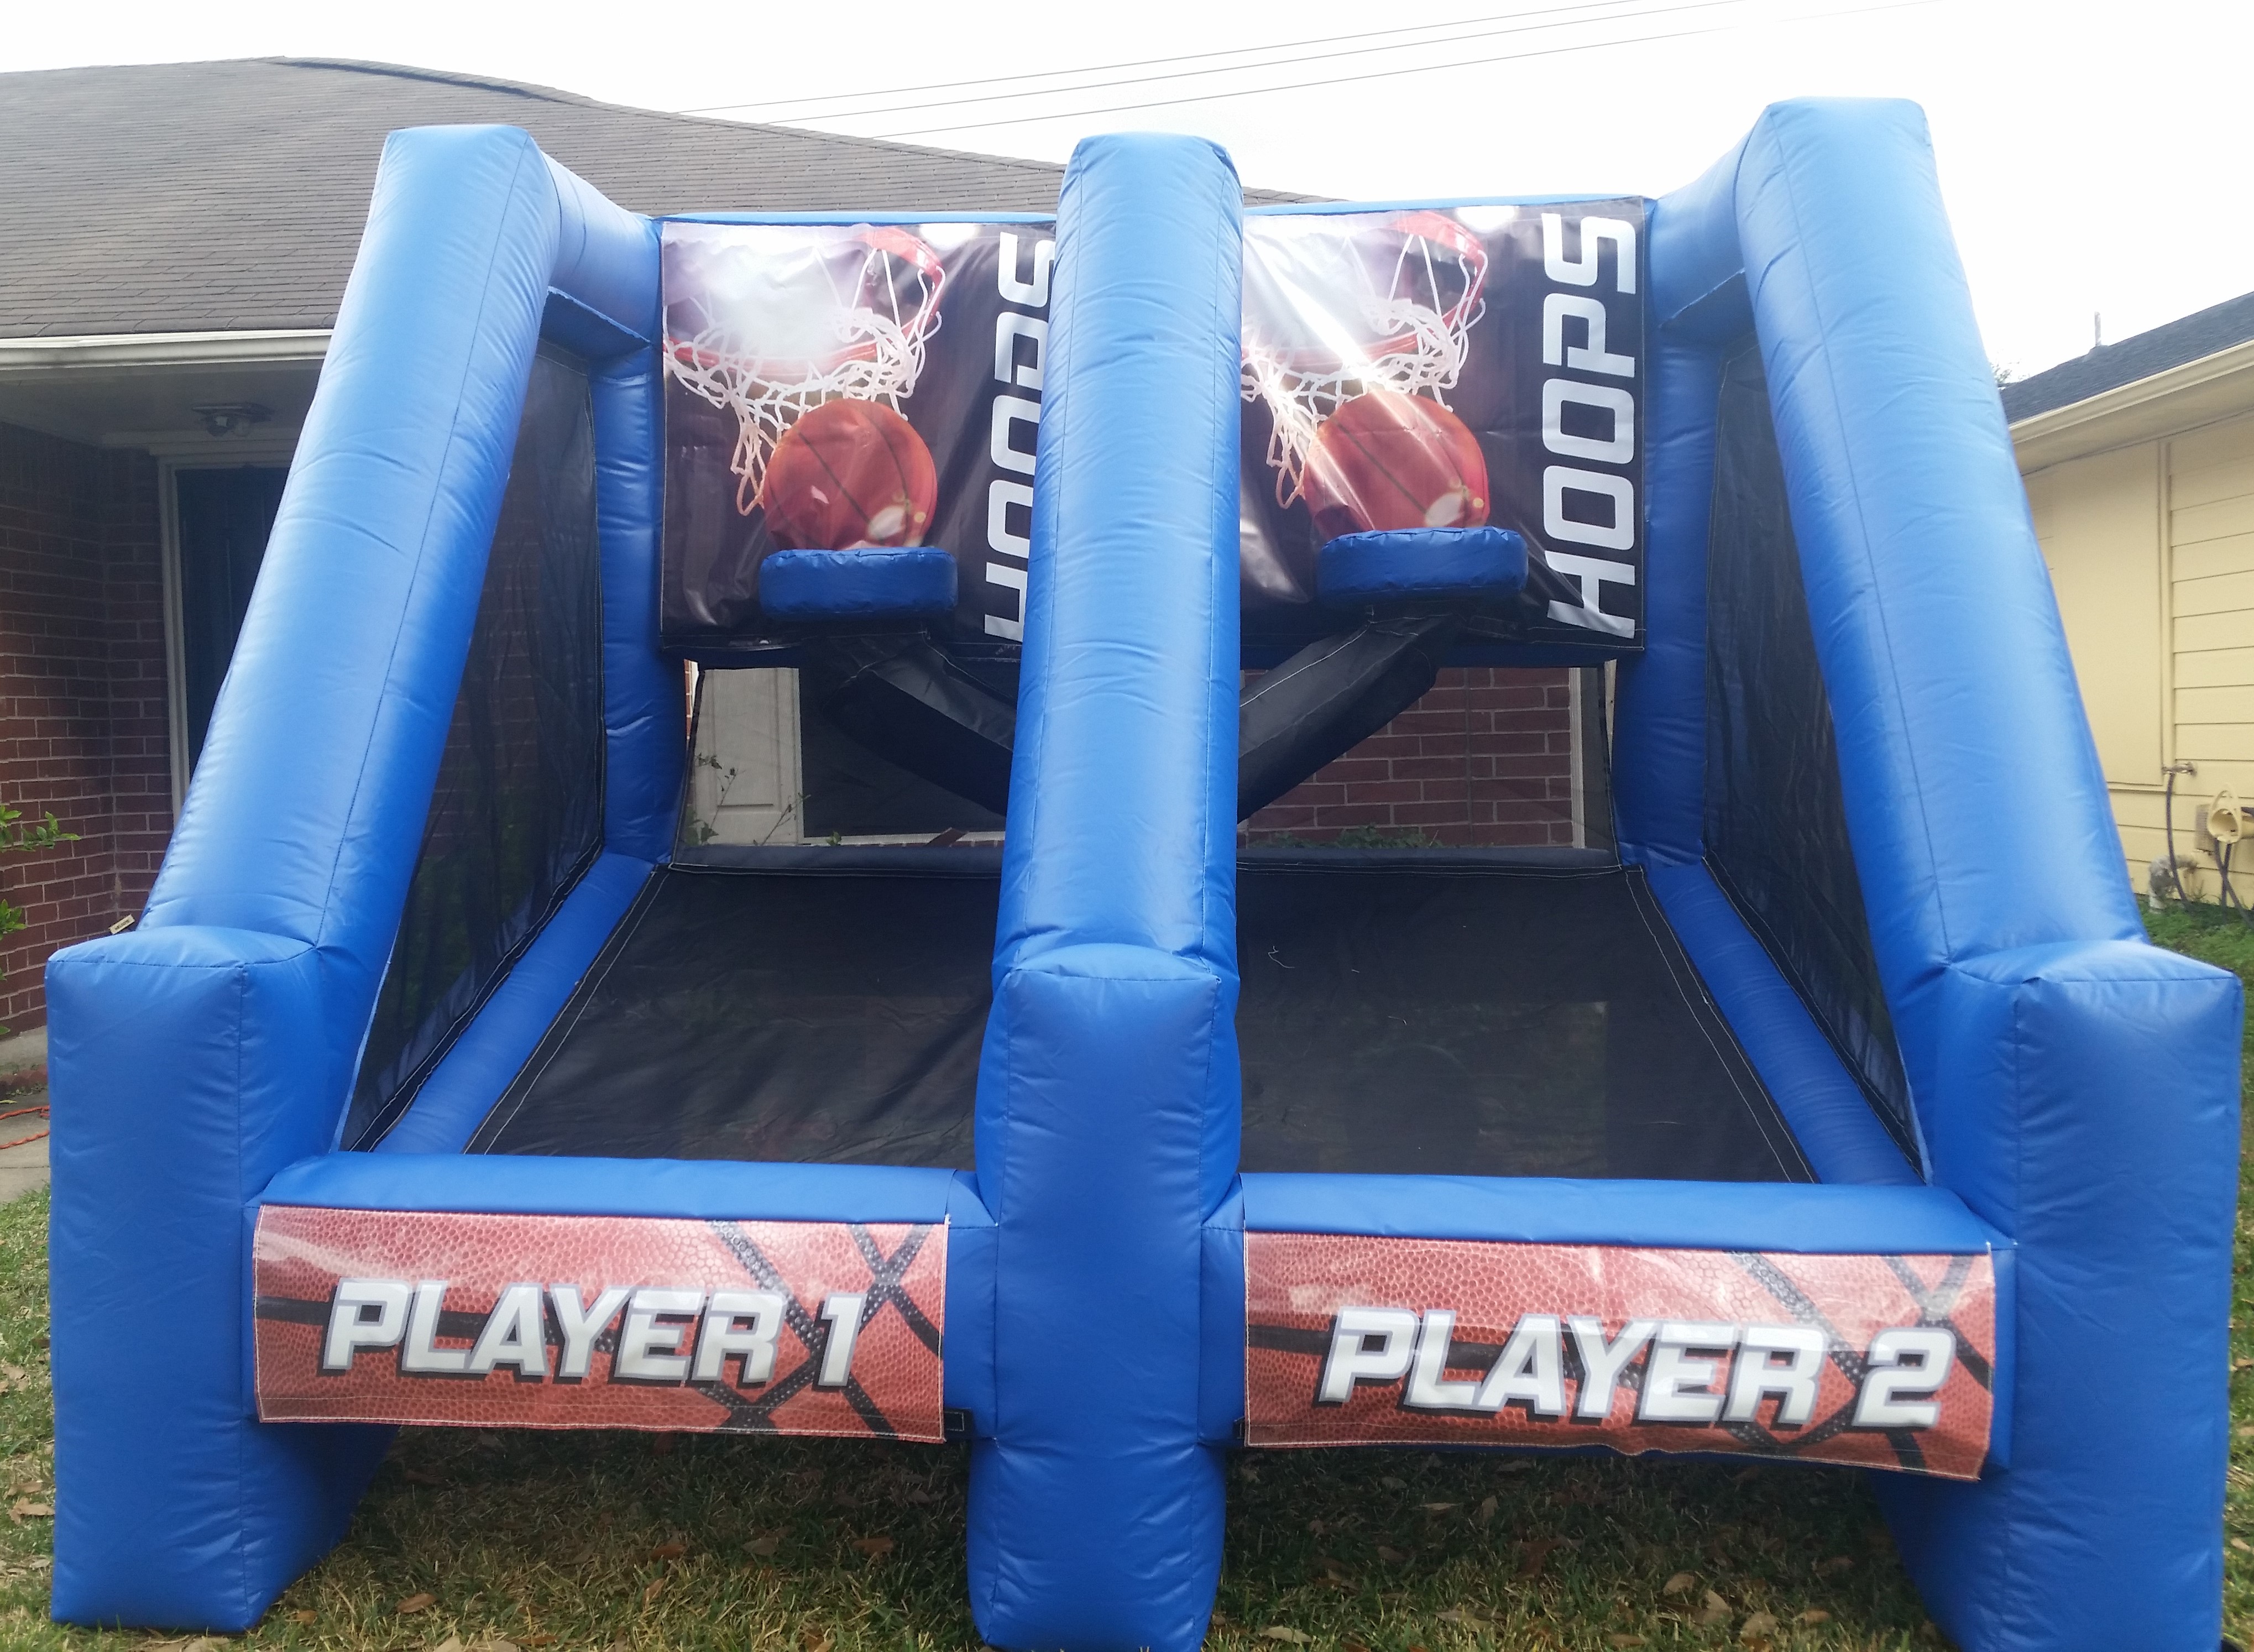 basketball interactive games inflatables